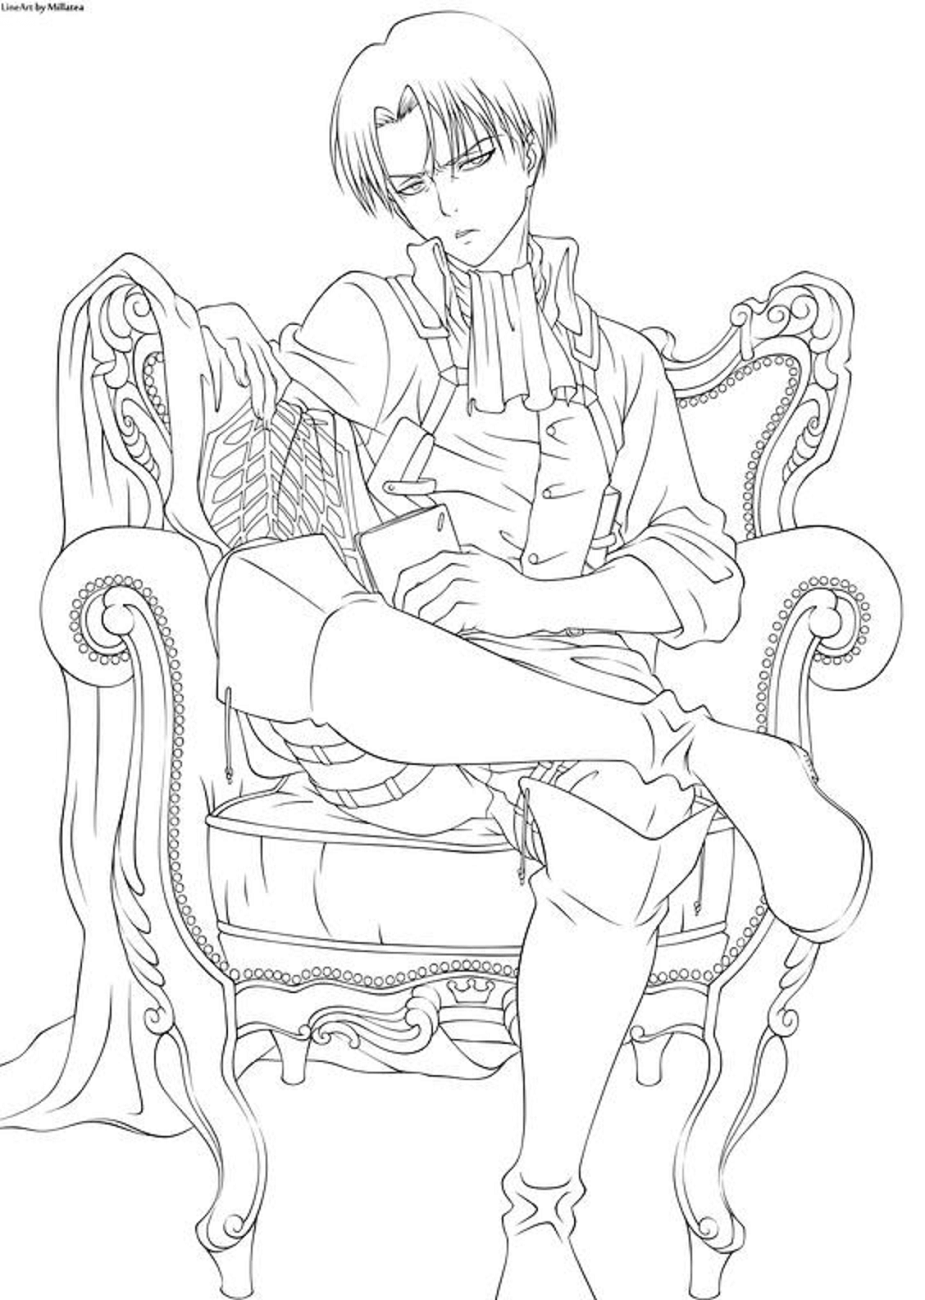 Attack On Titan Coloring Pages   Free Printable Coloring Pages for ...